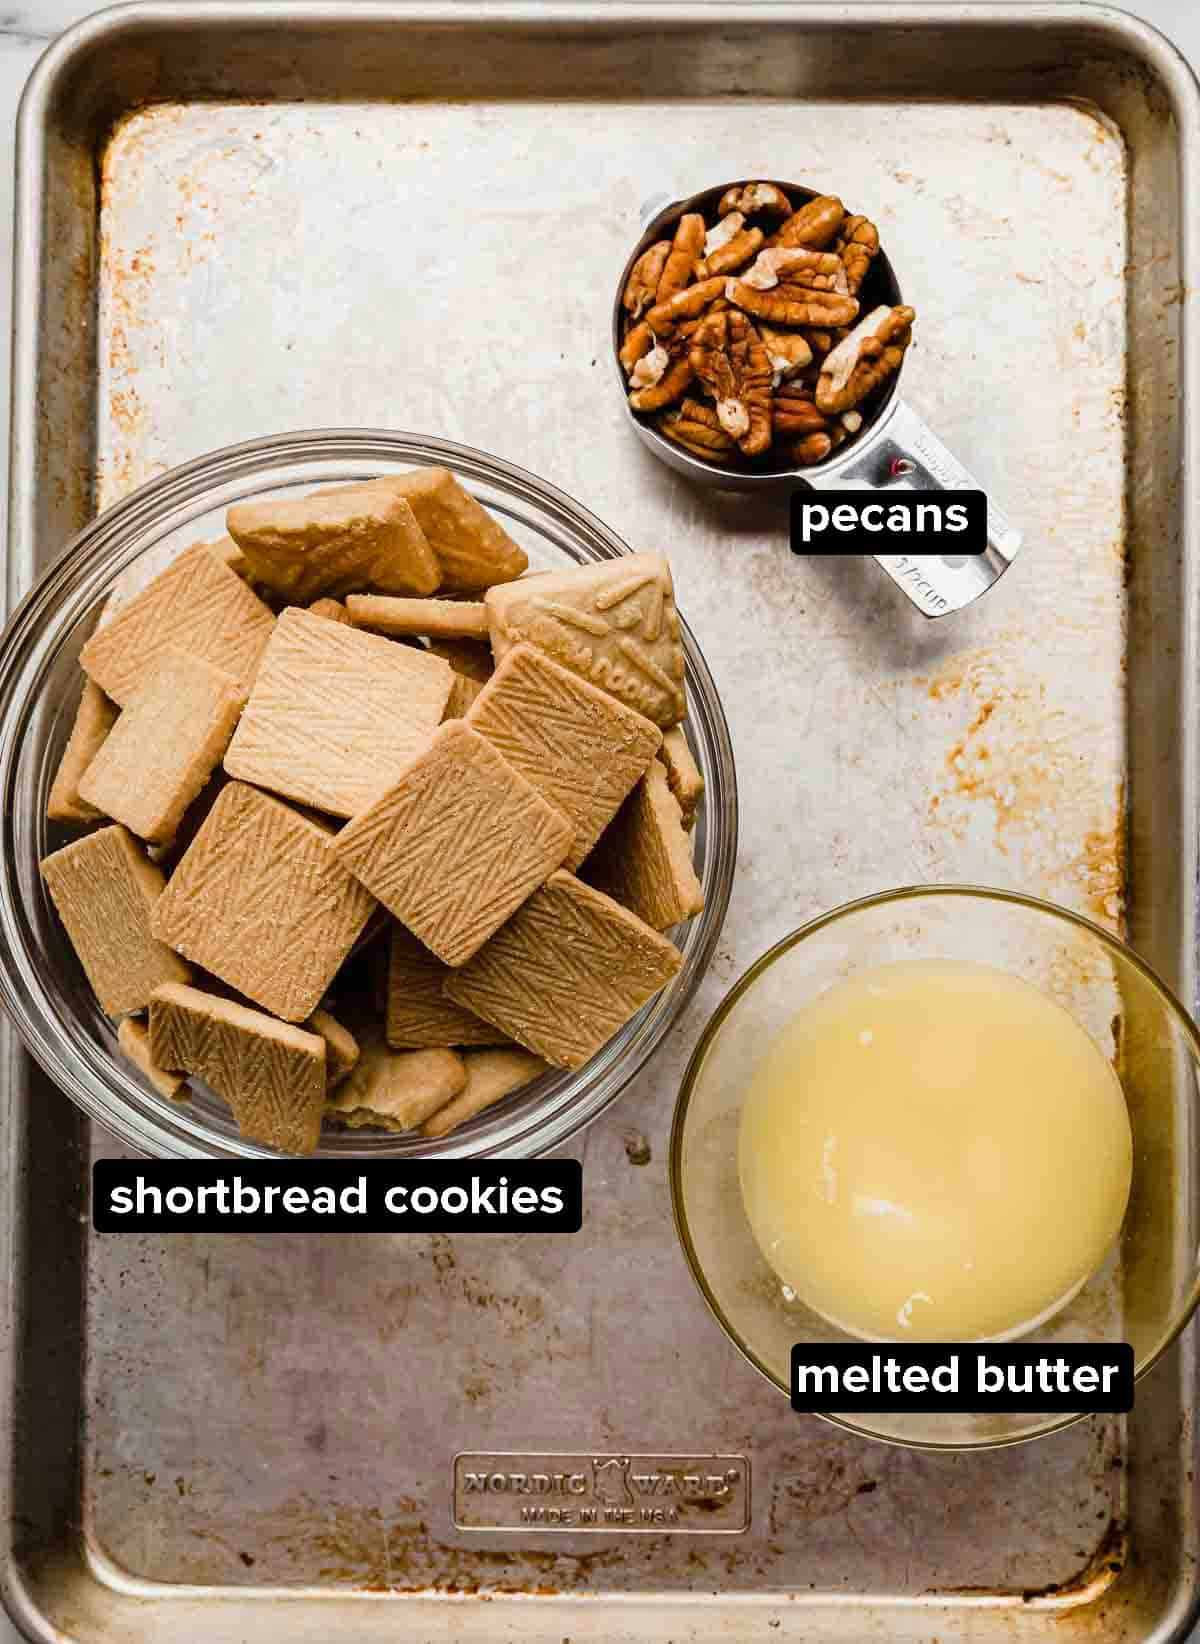 Ingredients used to make a pecan shortbread crust; shortbread cookies, pecans, and melted butter (used to make a Possum Pie recipe).